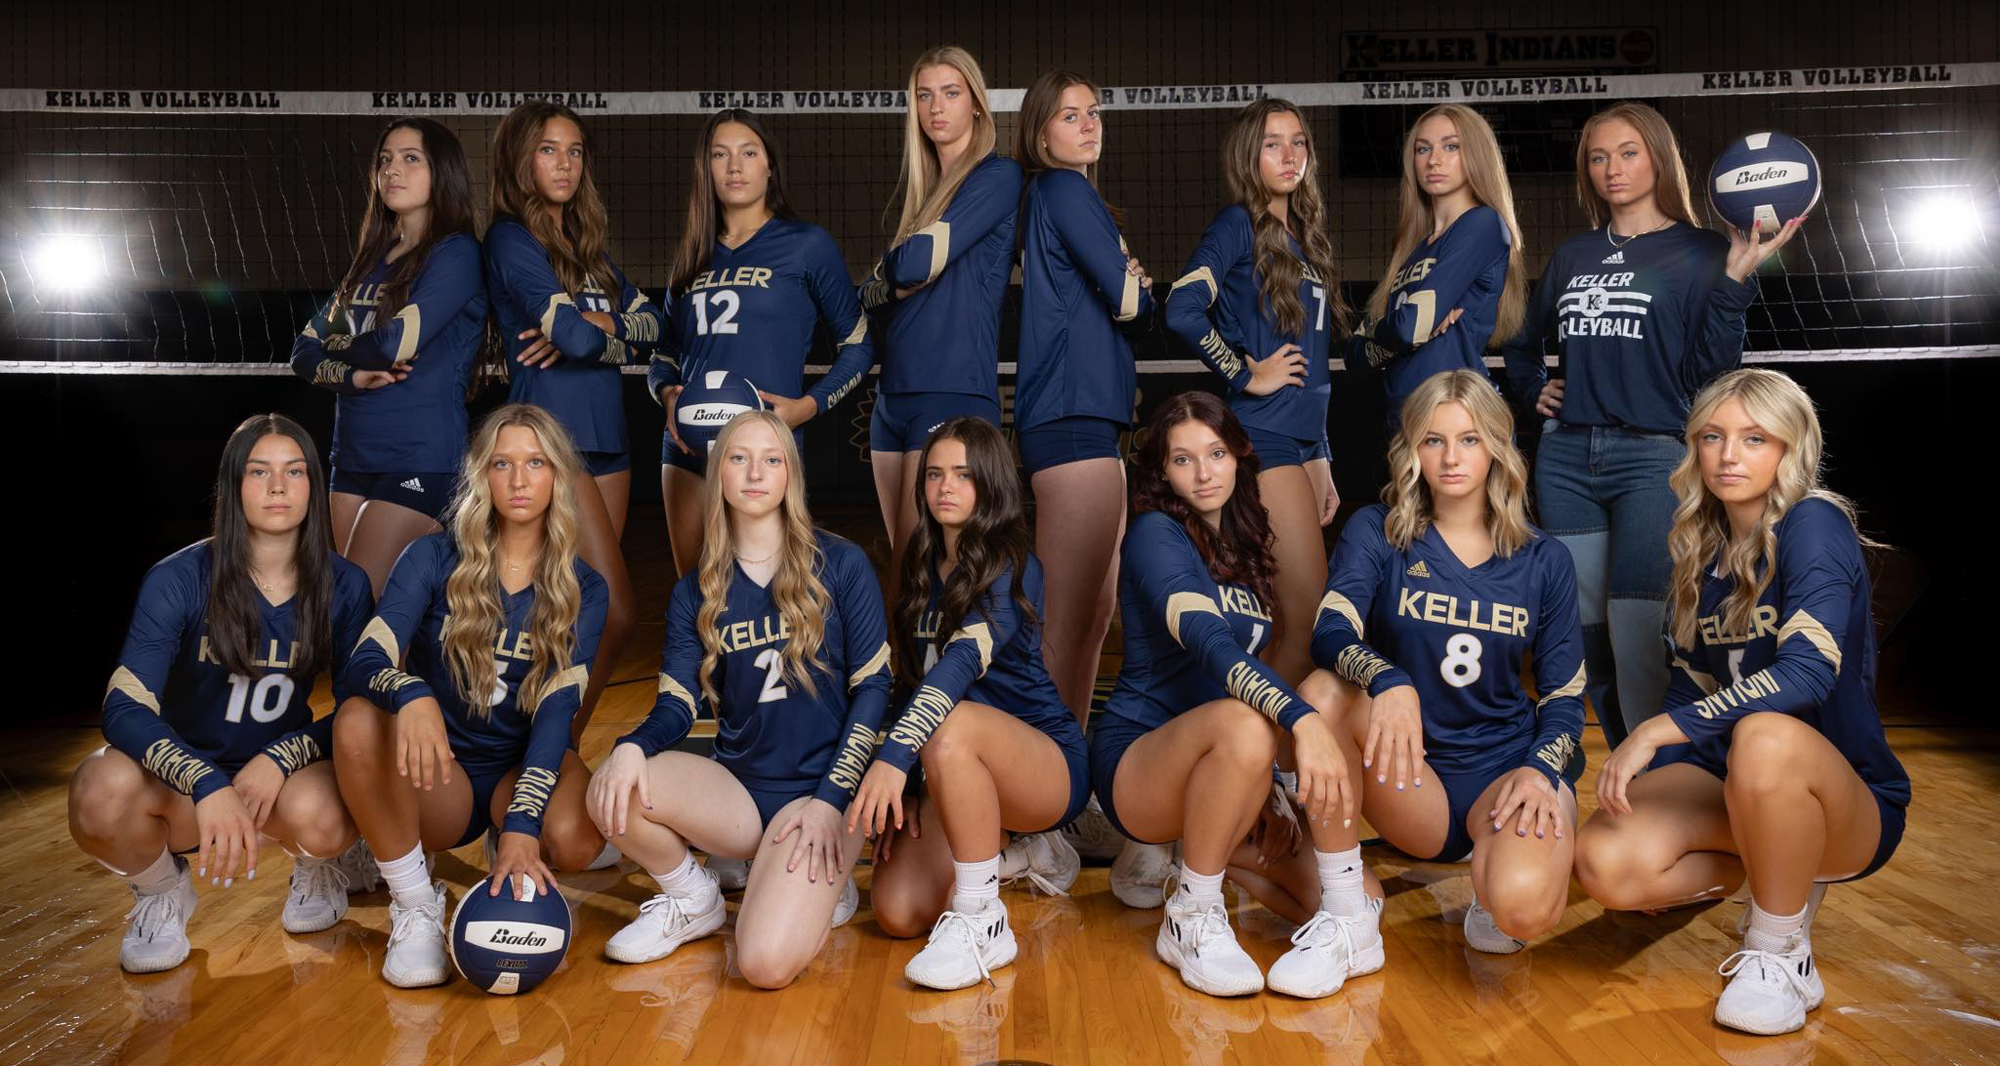 Keller volleyball team poses for a photo